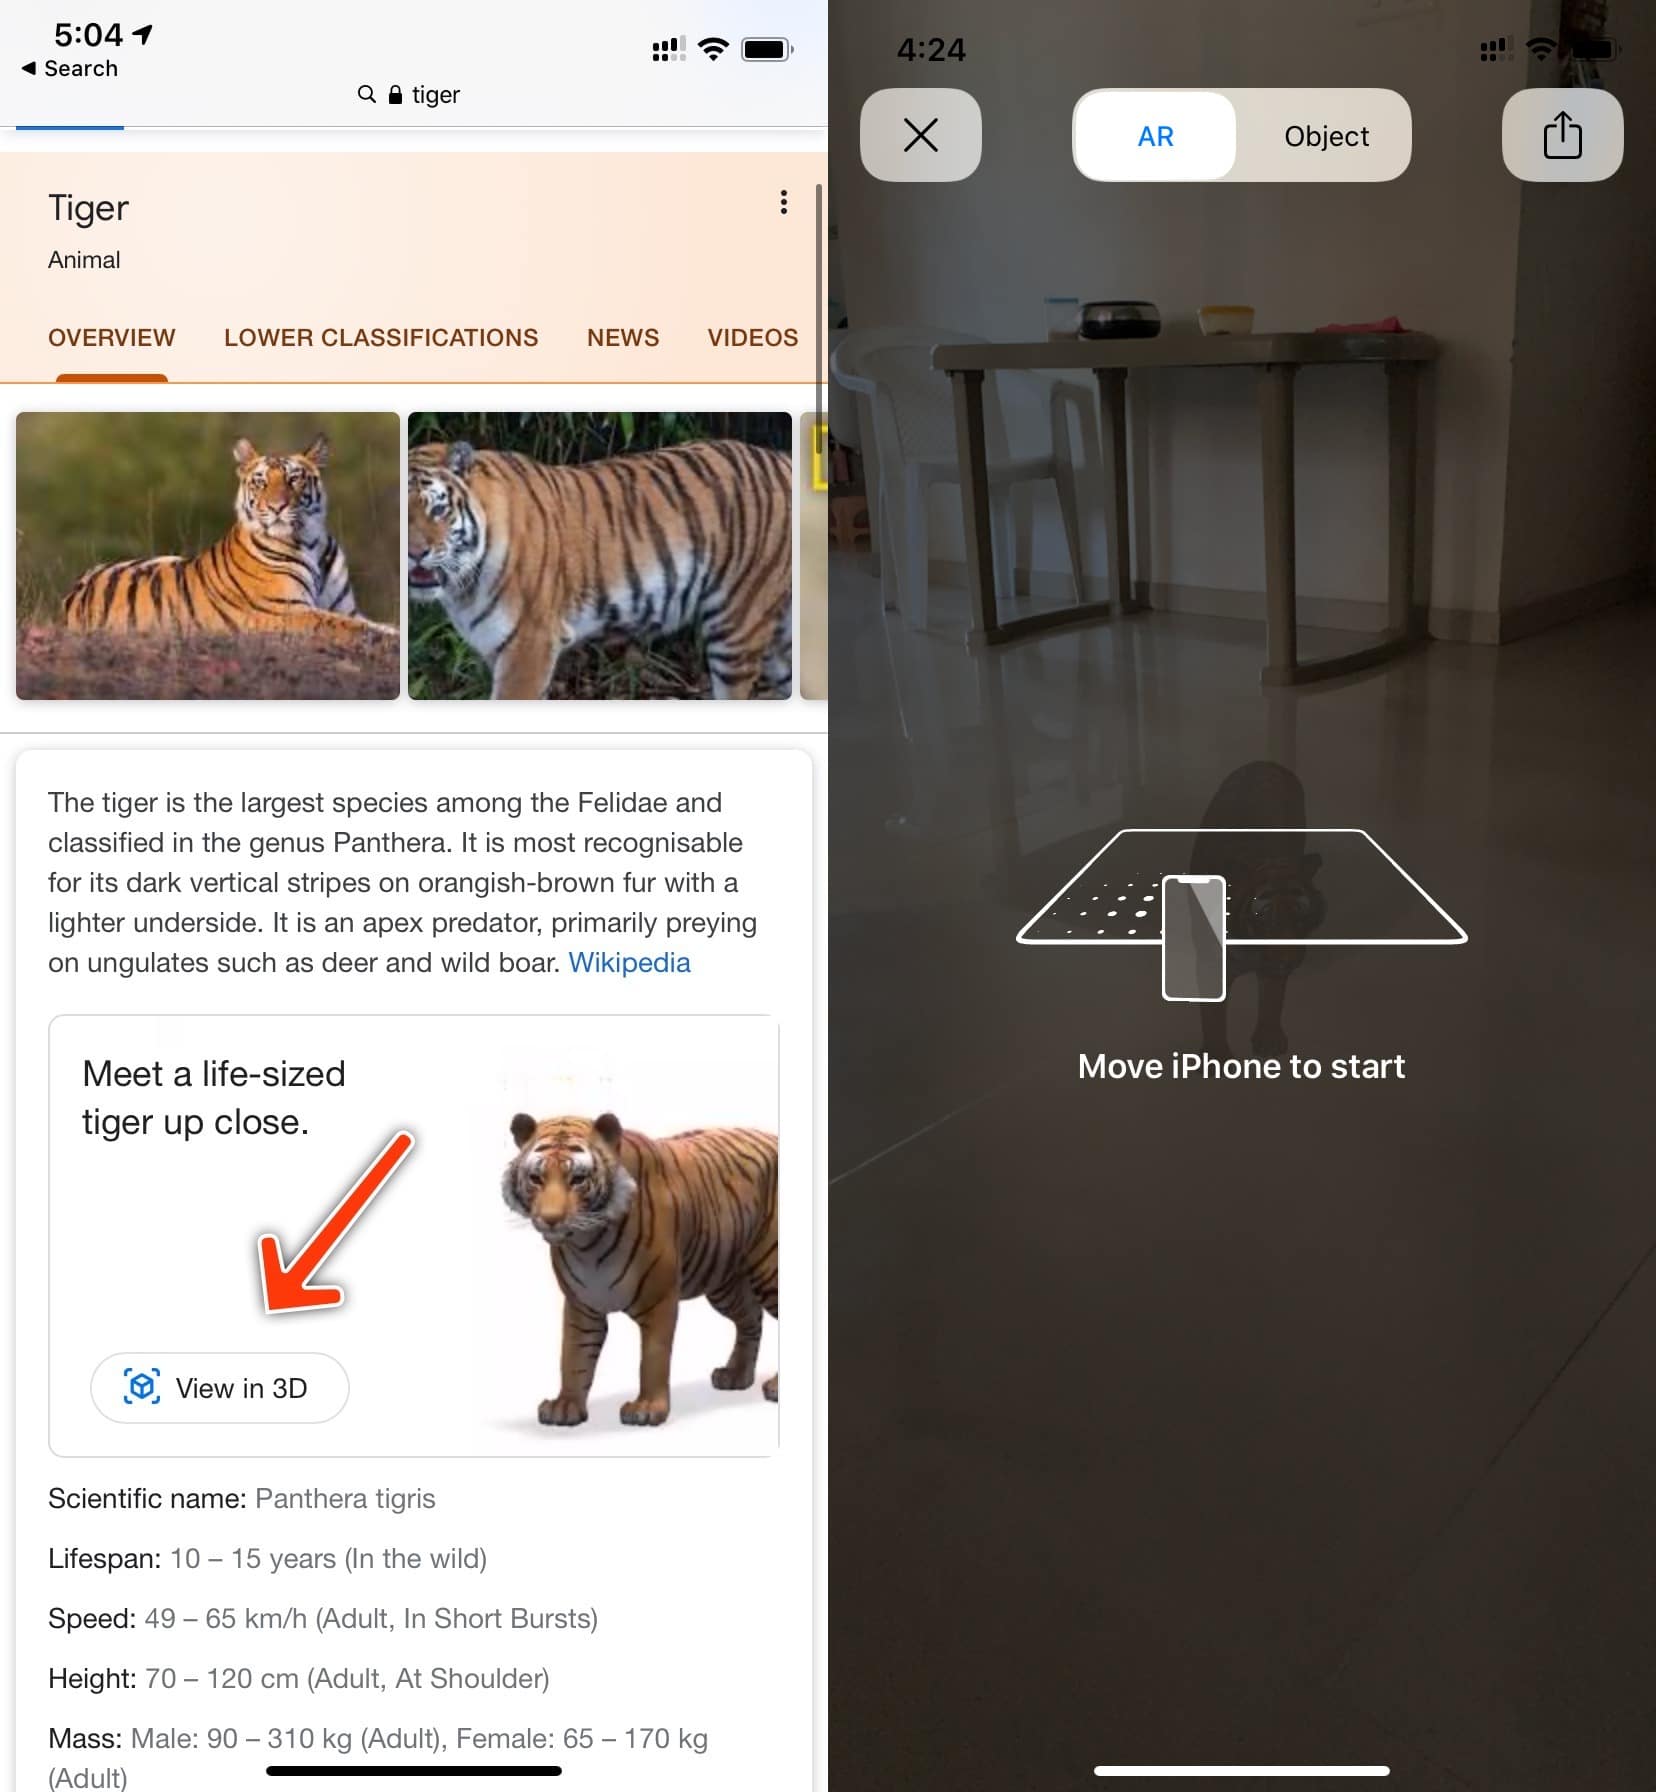 How To Fix When Google S View In 3d Animals Ar Object Doesn T Work 9to5google